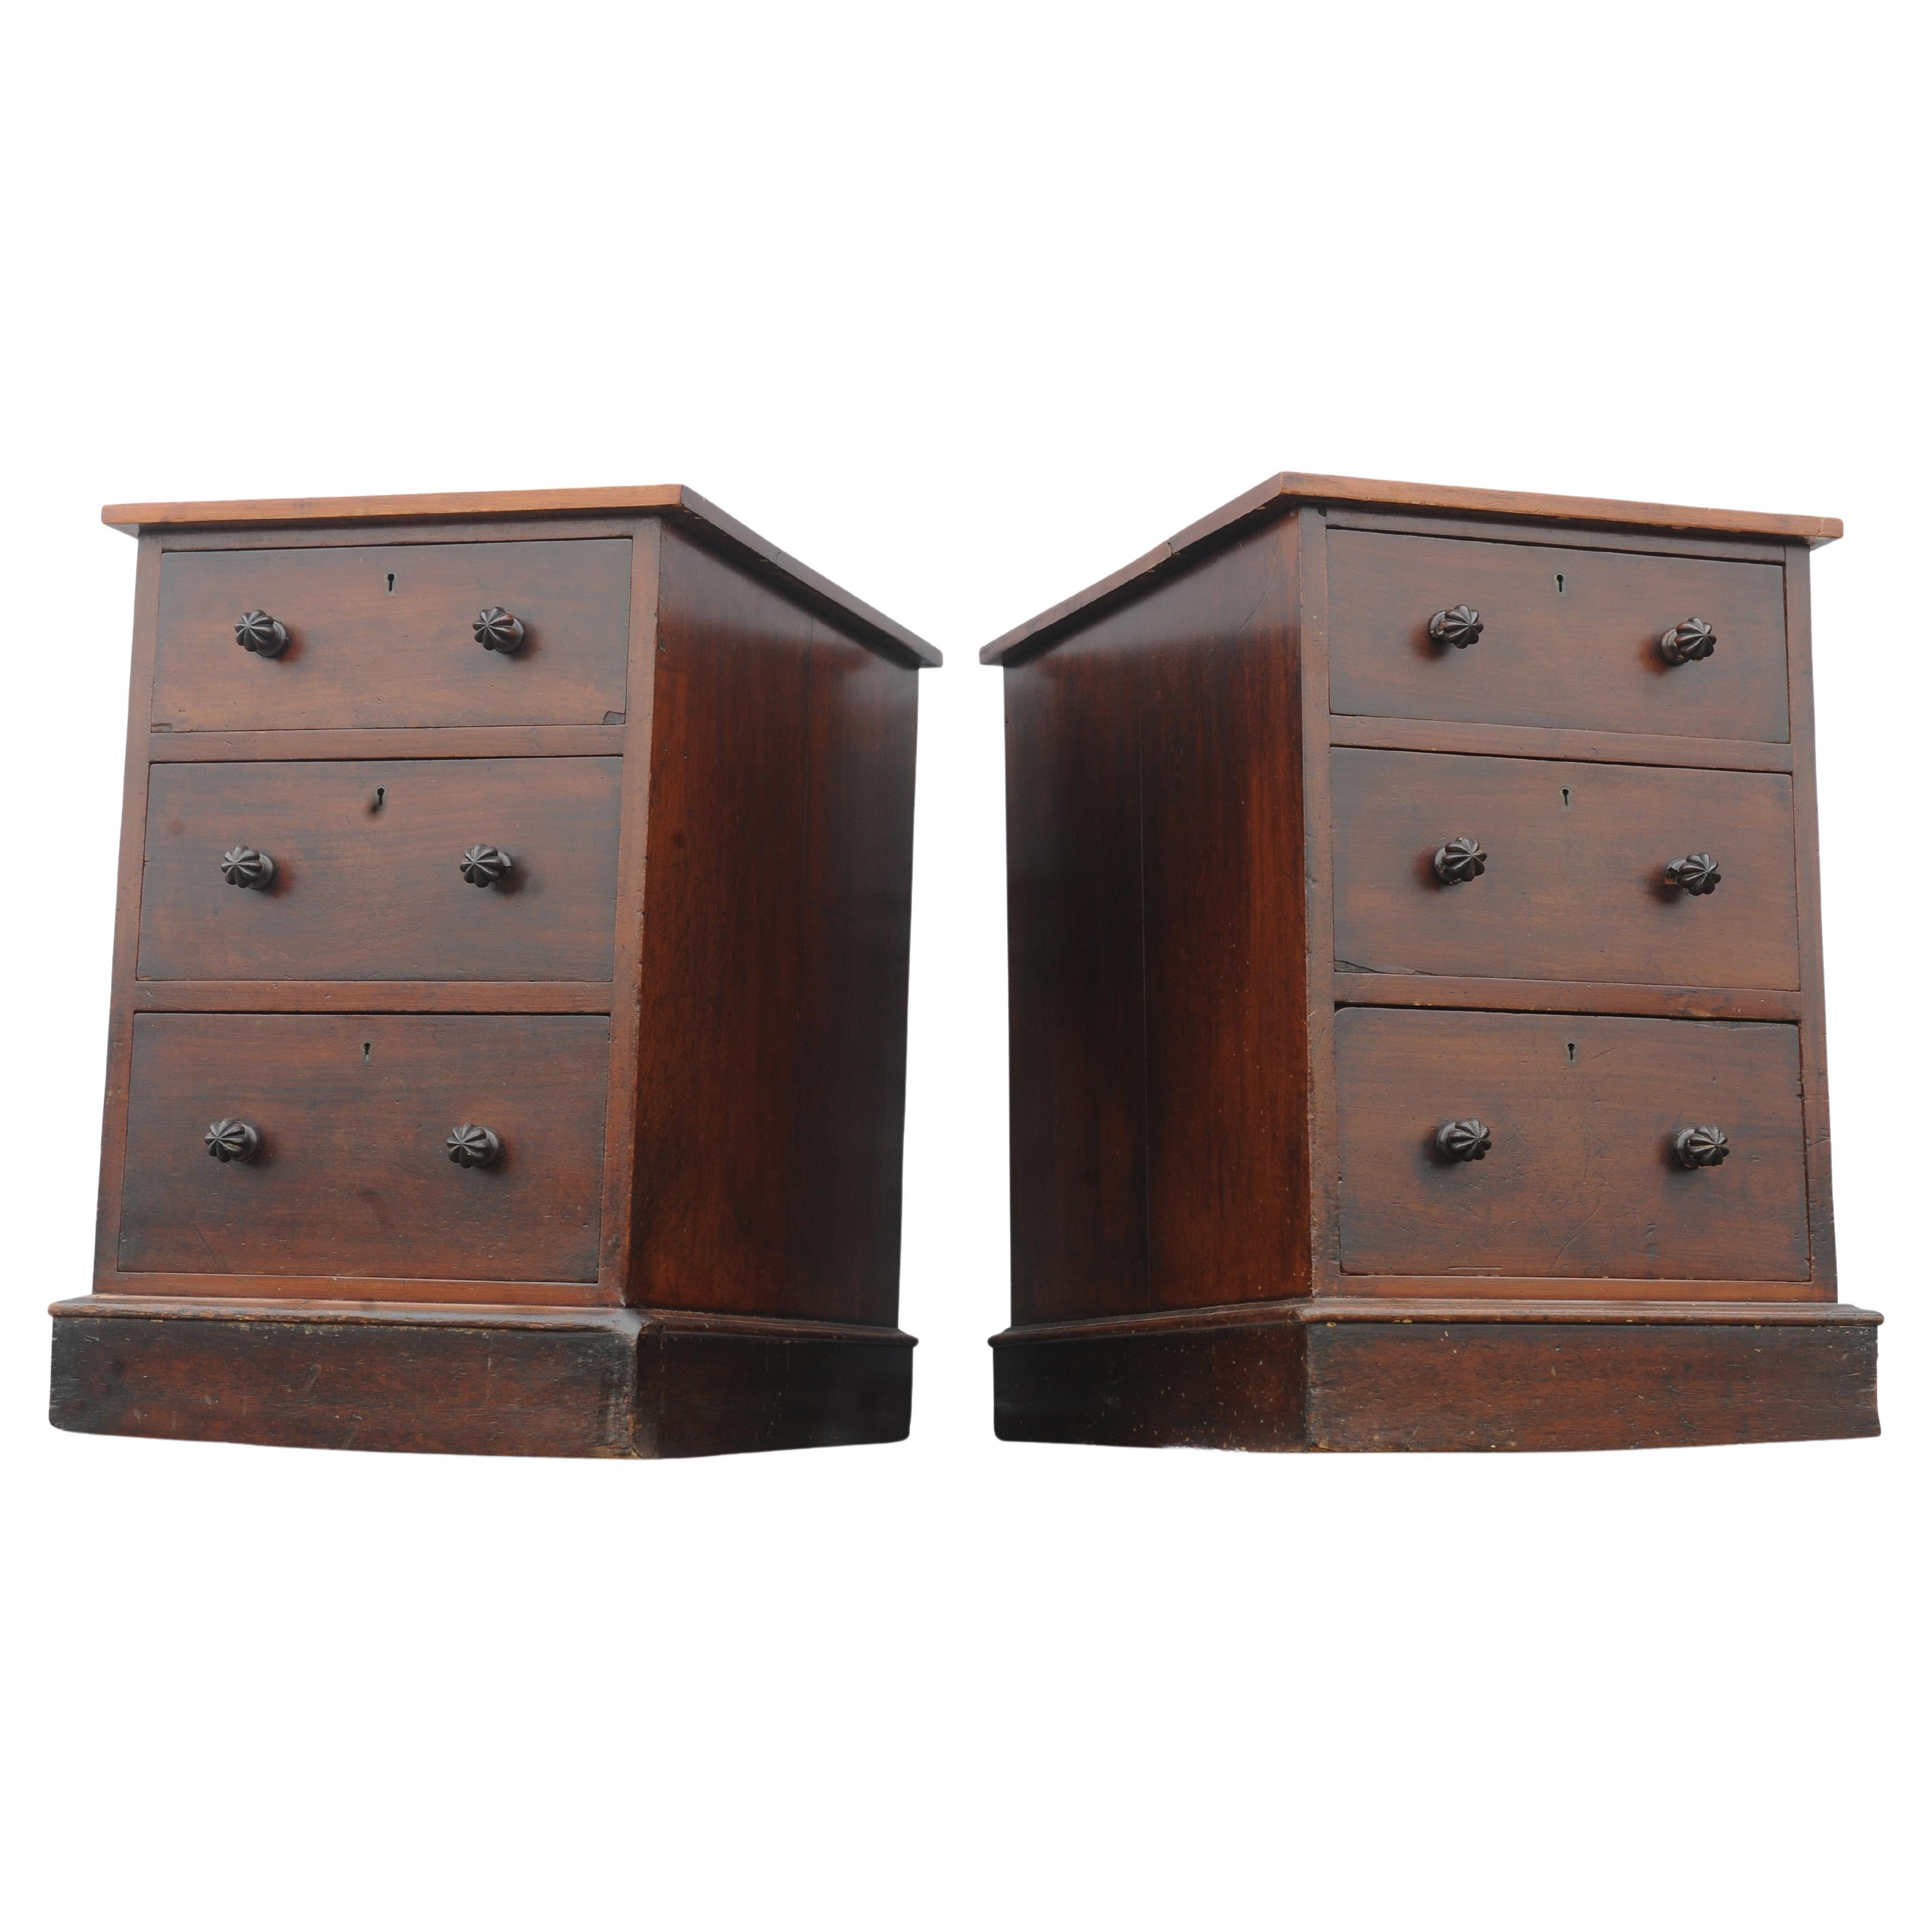 A Fine and Rare Set of Late George III Three Drawer Mahogany Nightstands Stamped 